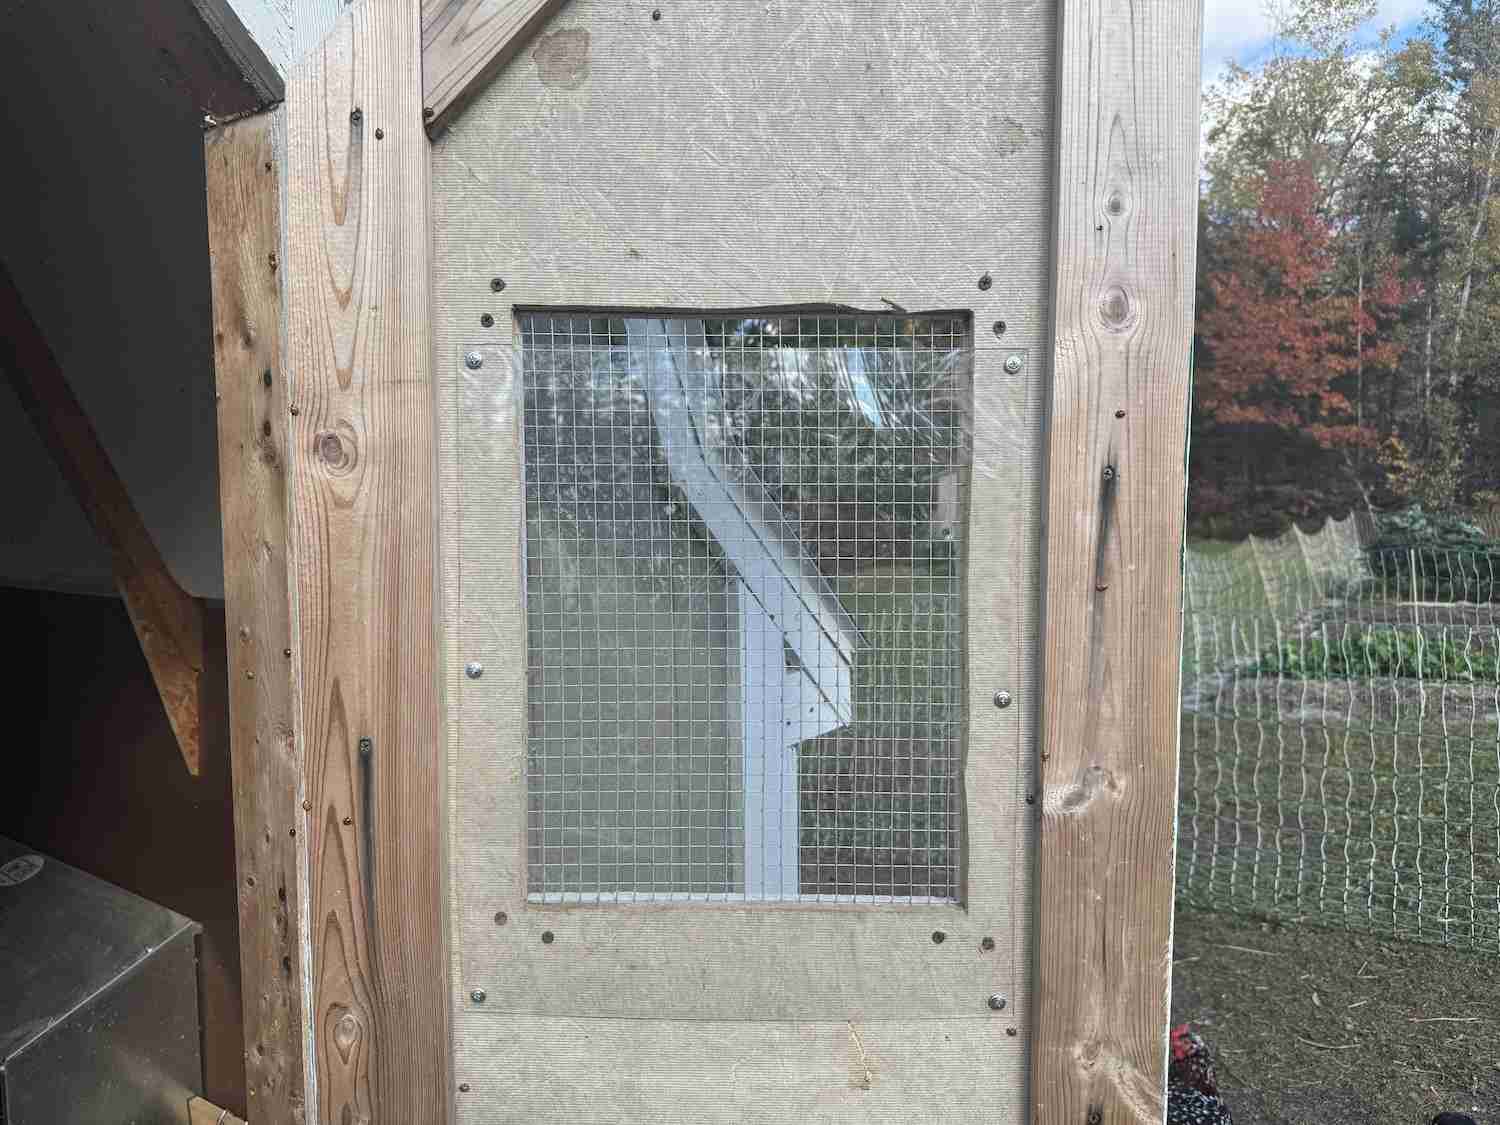 A photo showing a sheet of polycarbonate partially covering a window in the chicken coop